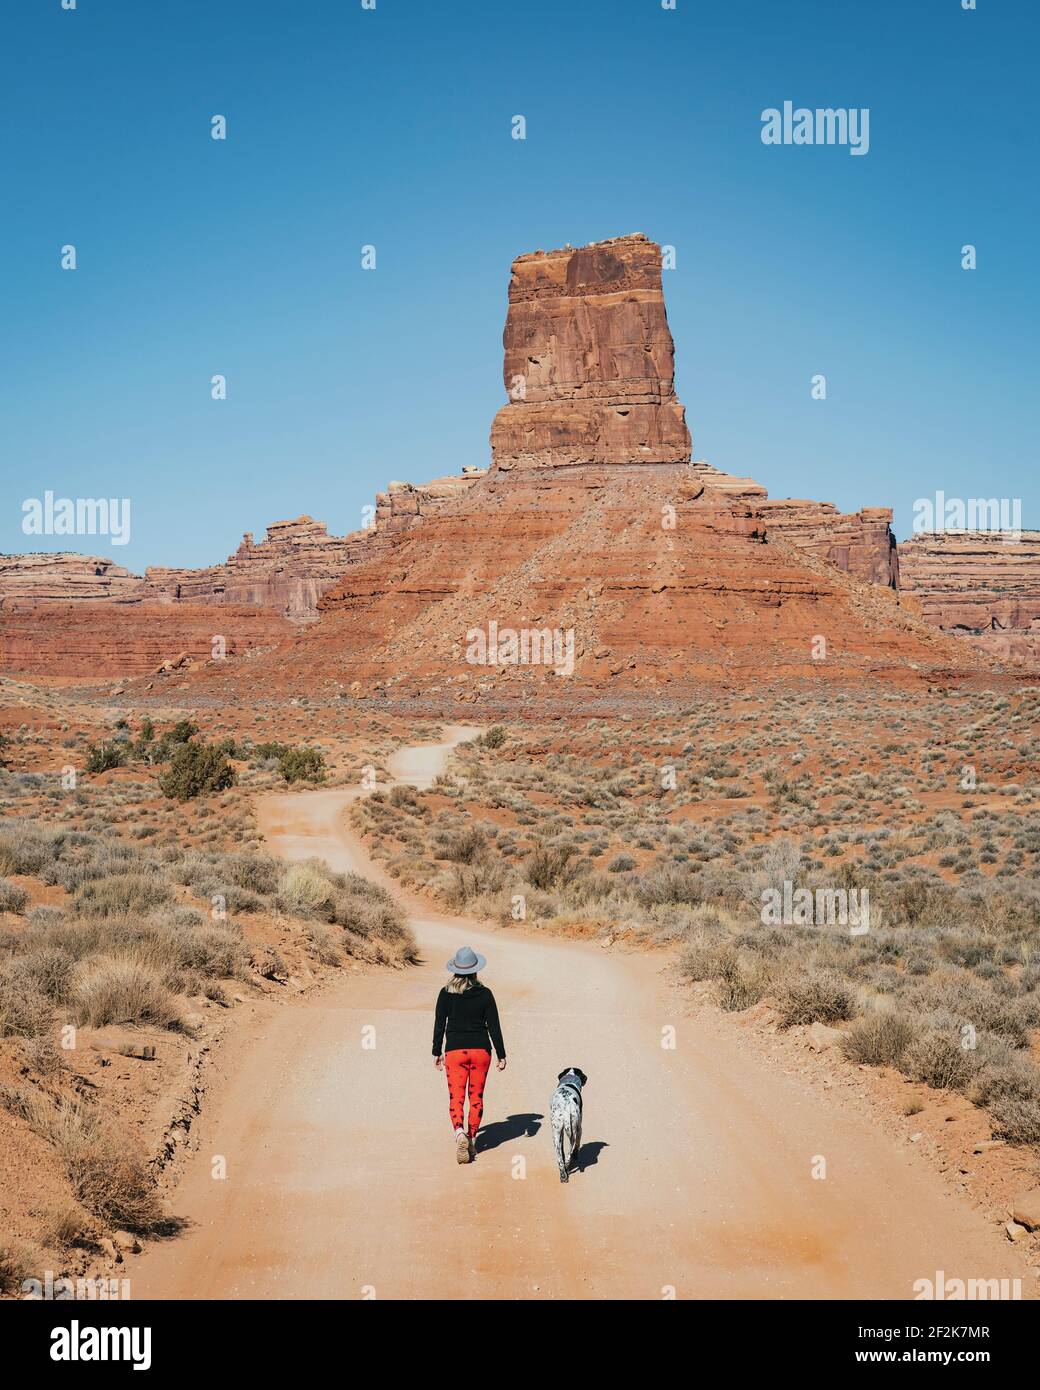 Rear view of woman walking with dog on dirt road leading towards sandstone formations against clear sky Stock Photo